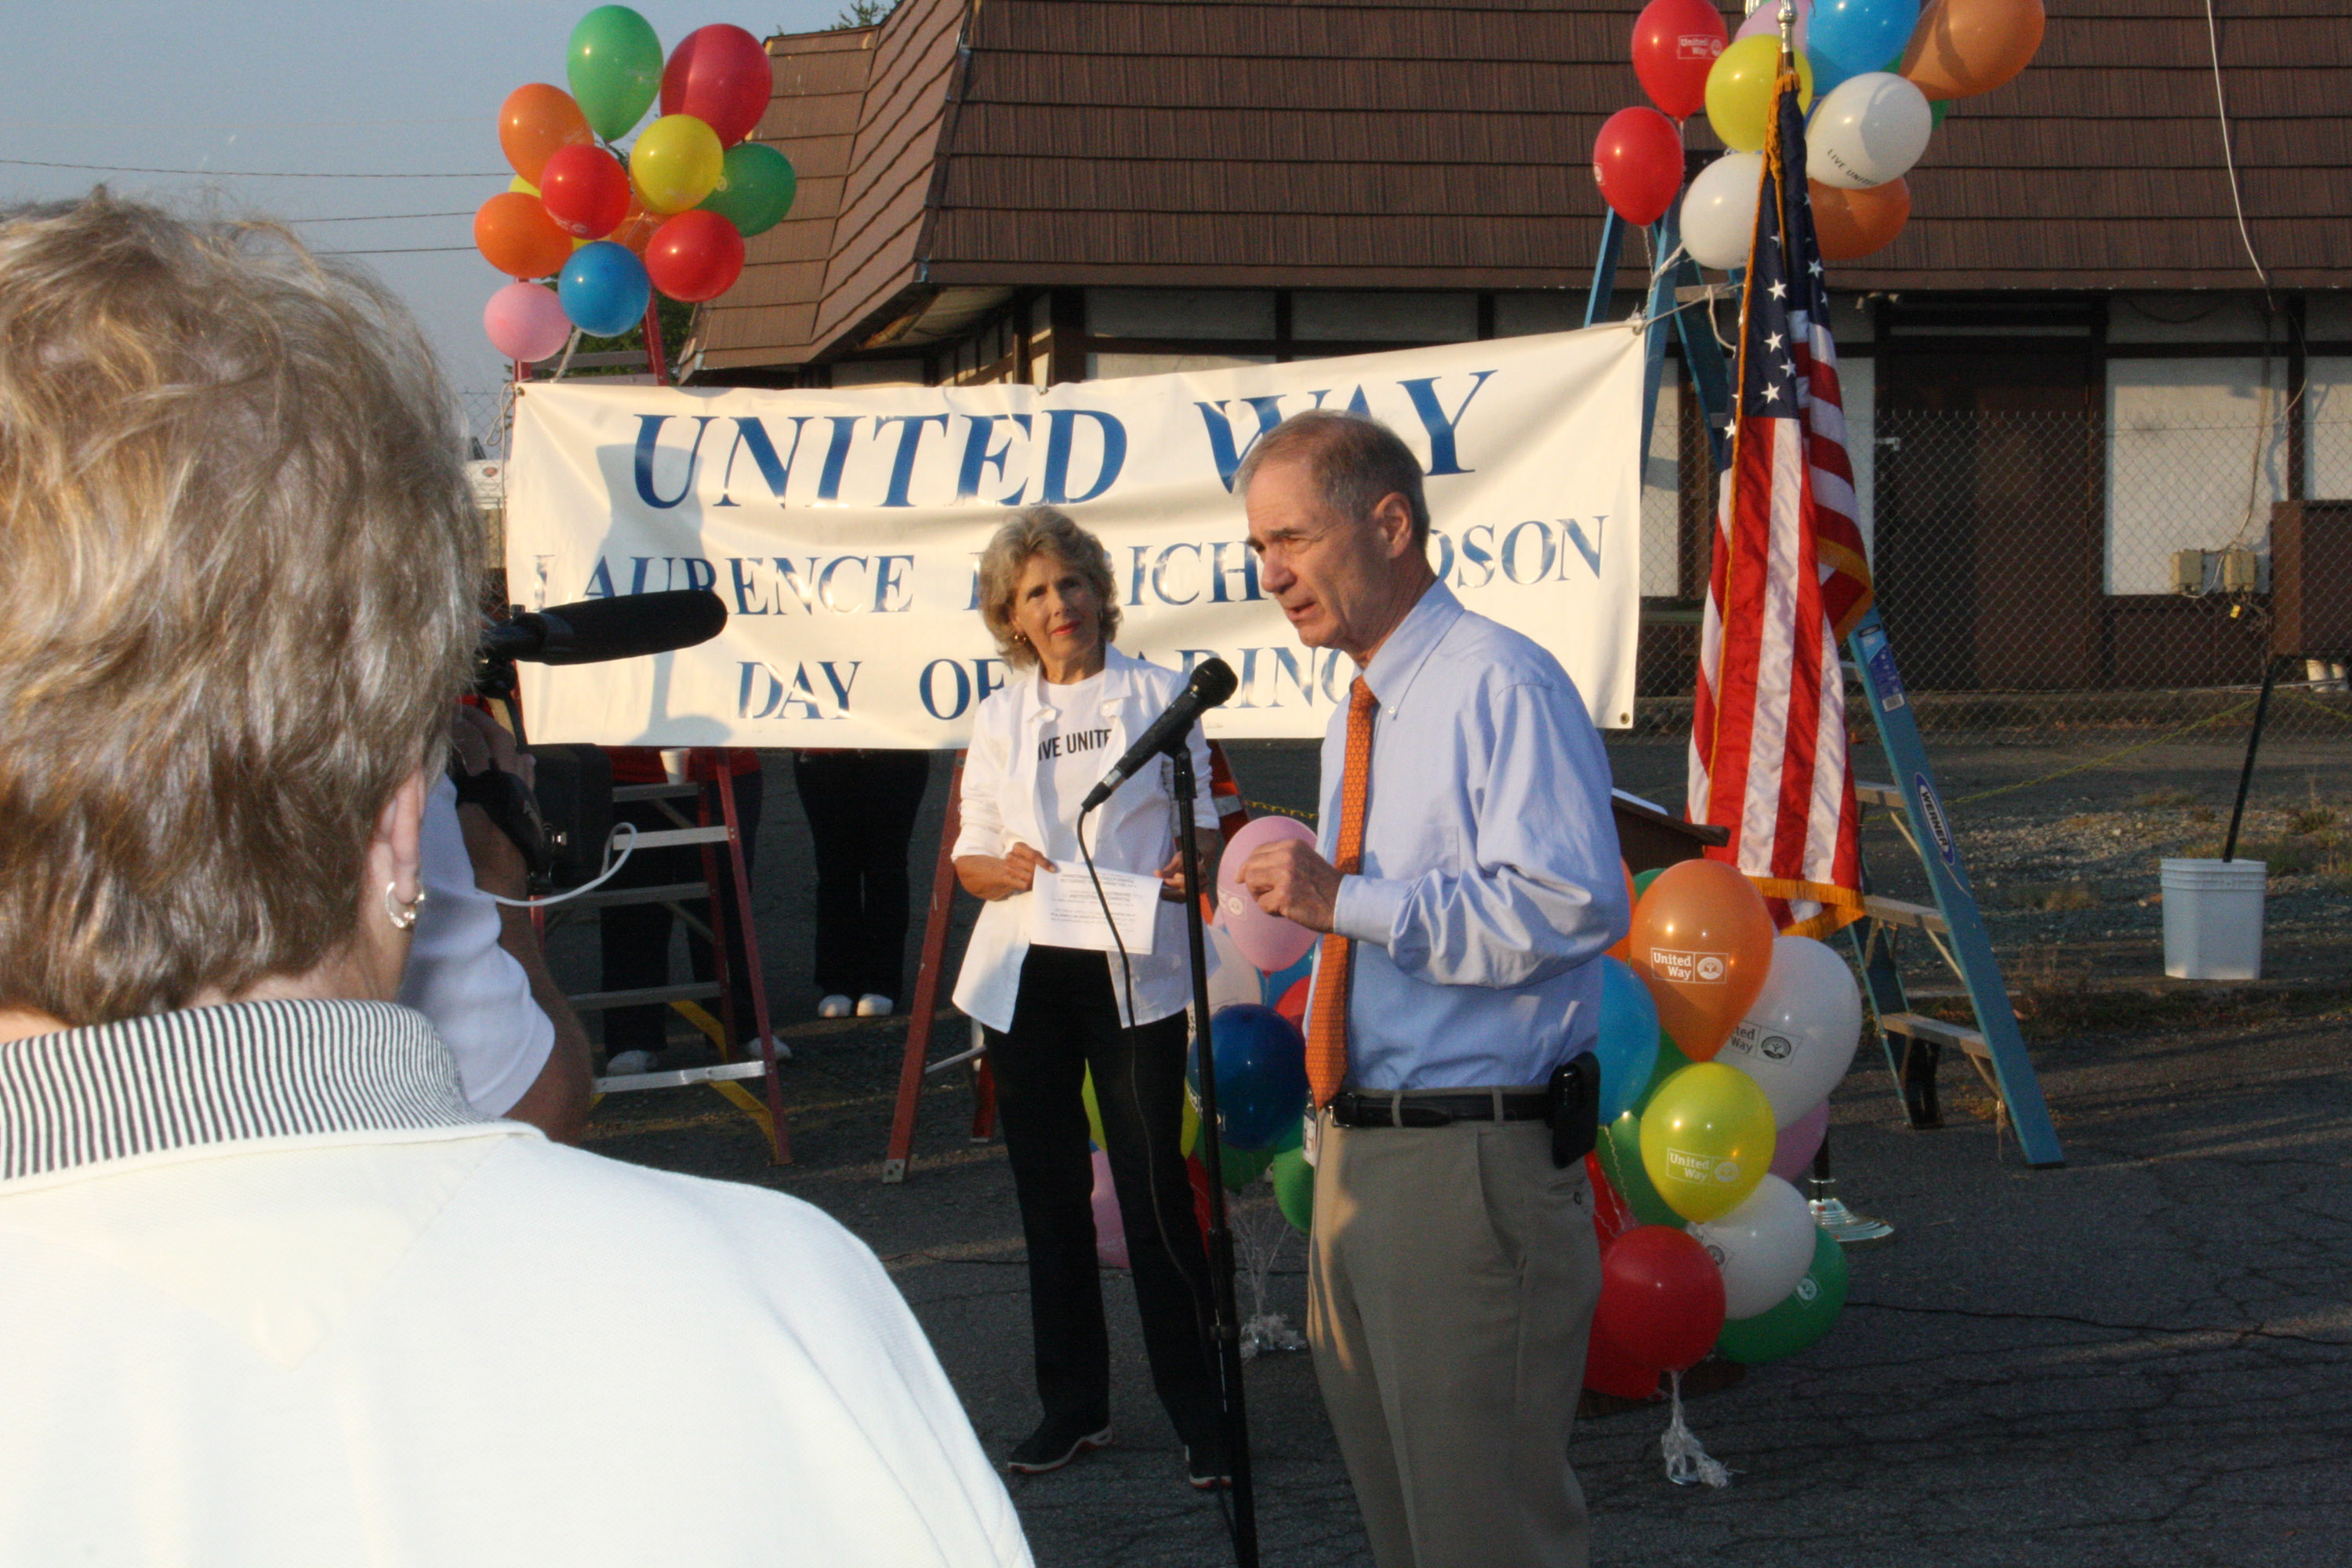 Leonard Sandridge speaking at a microphone to a crowd who gathered at a day of caring event